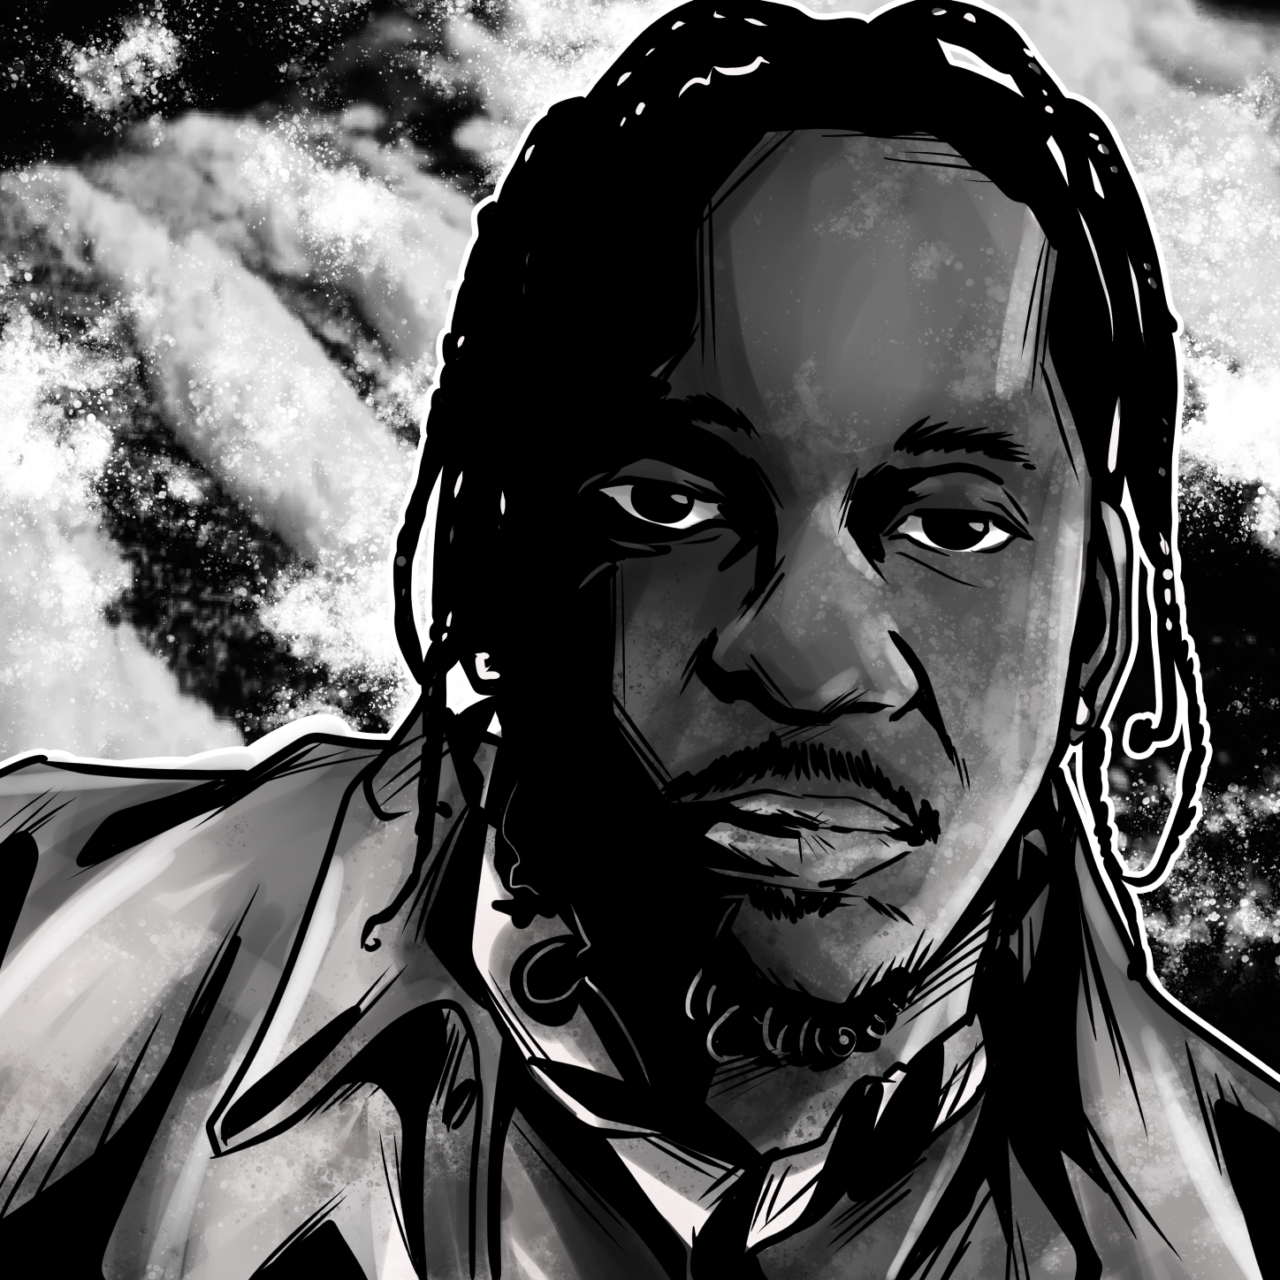 http://www.jeawok.com/wp-content/uploads/2022/05/pusha-t-1280x1280.png